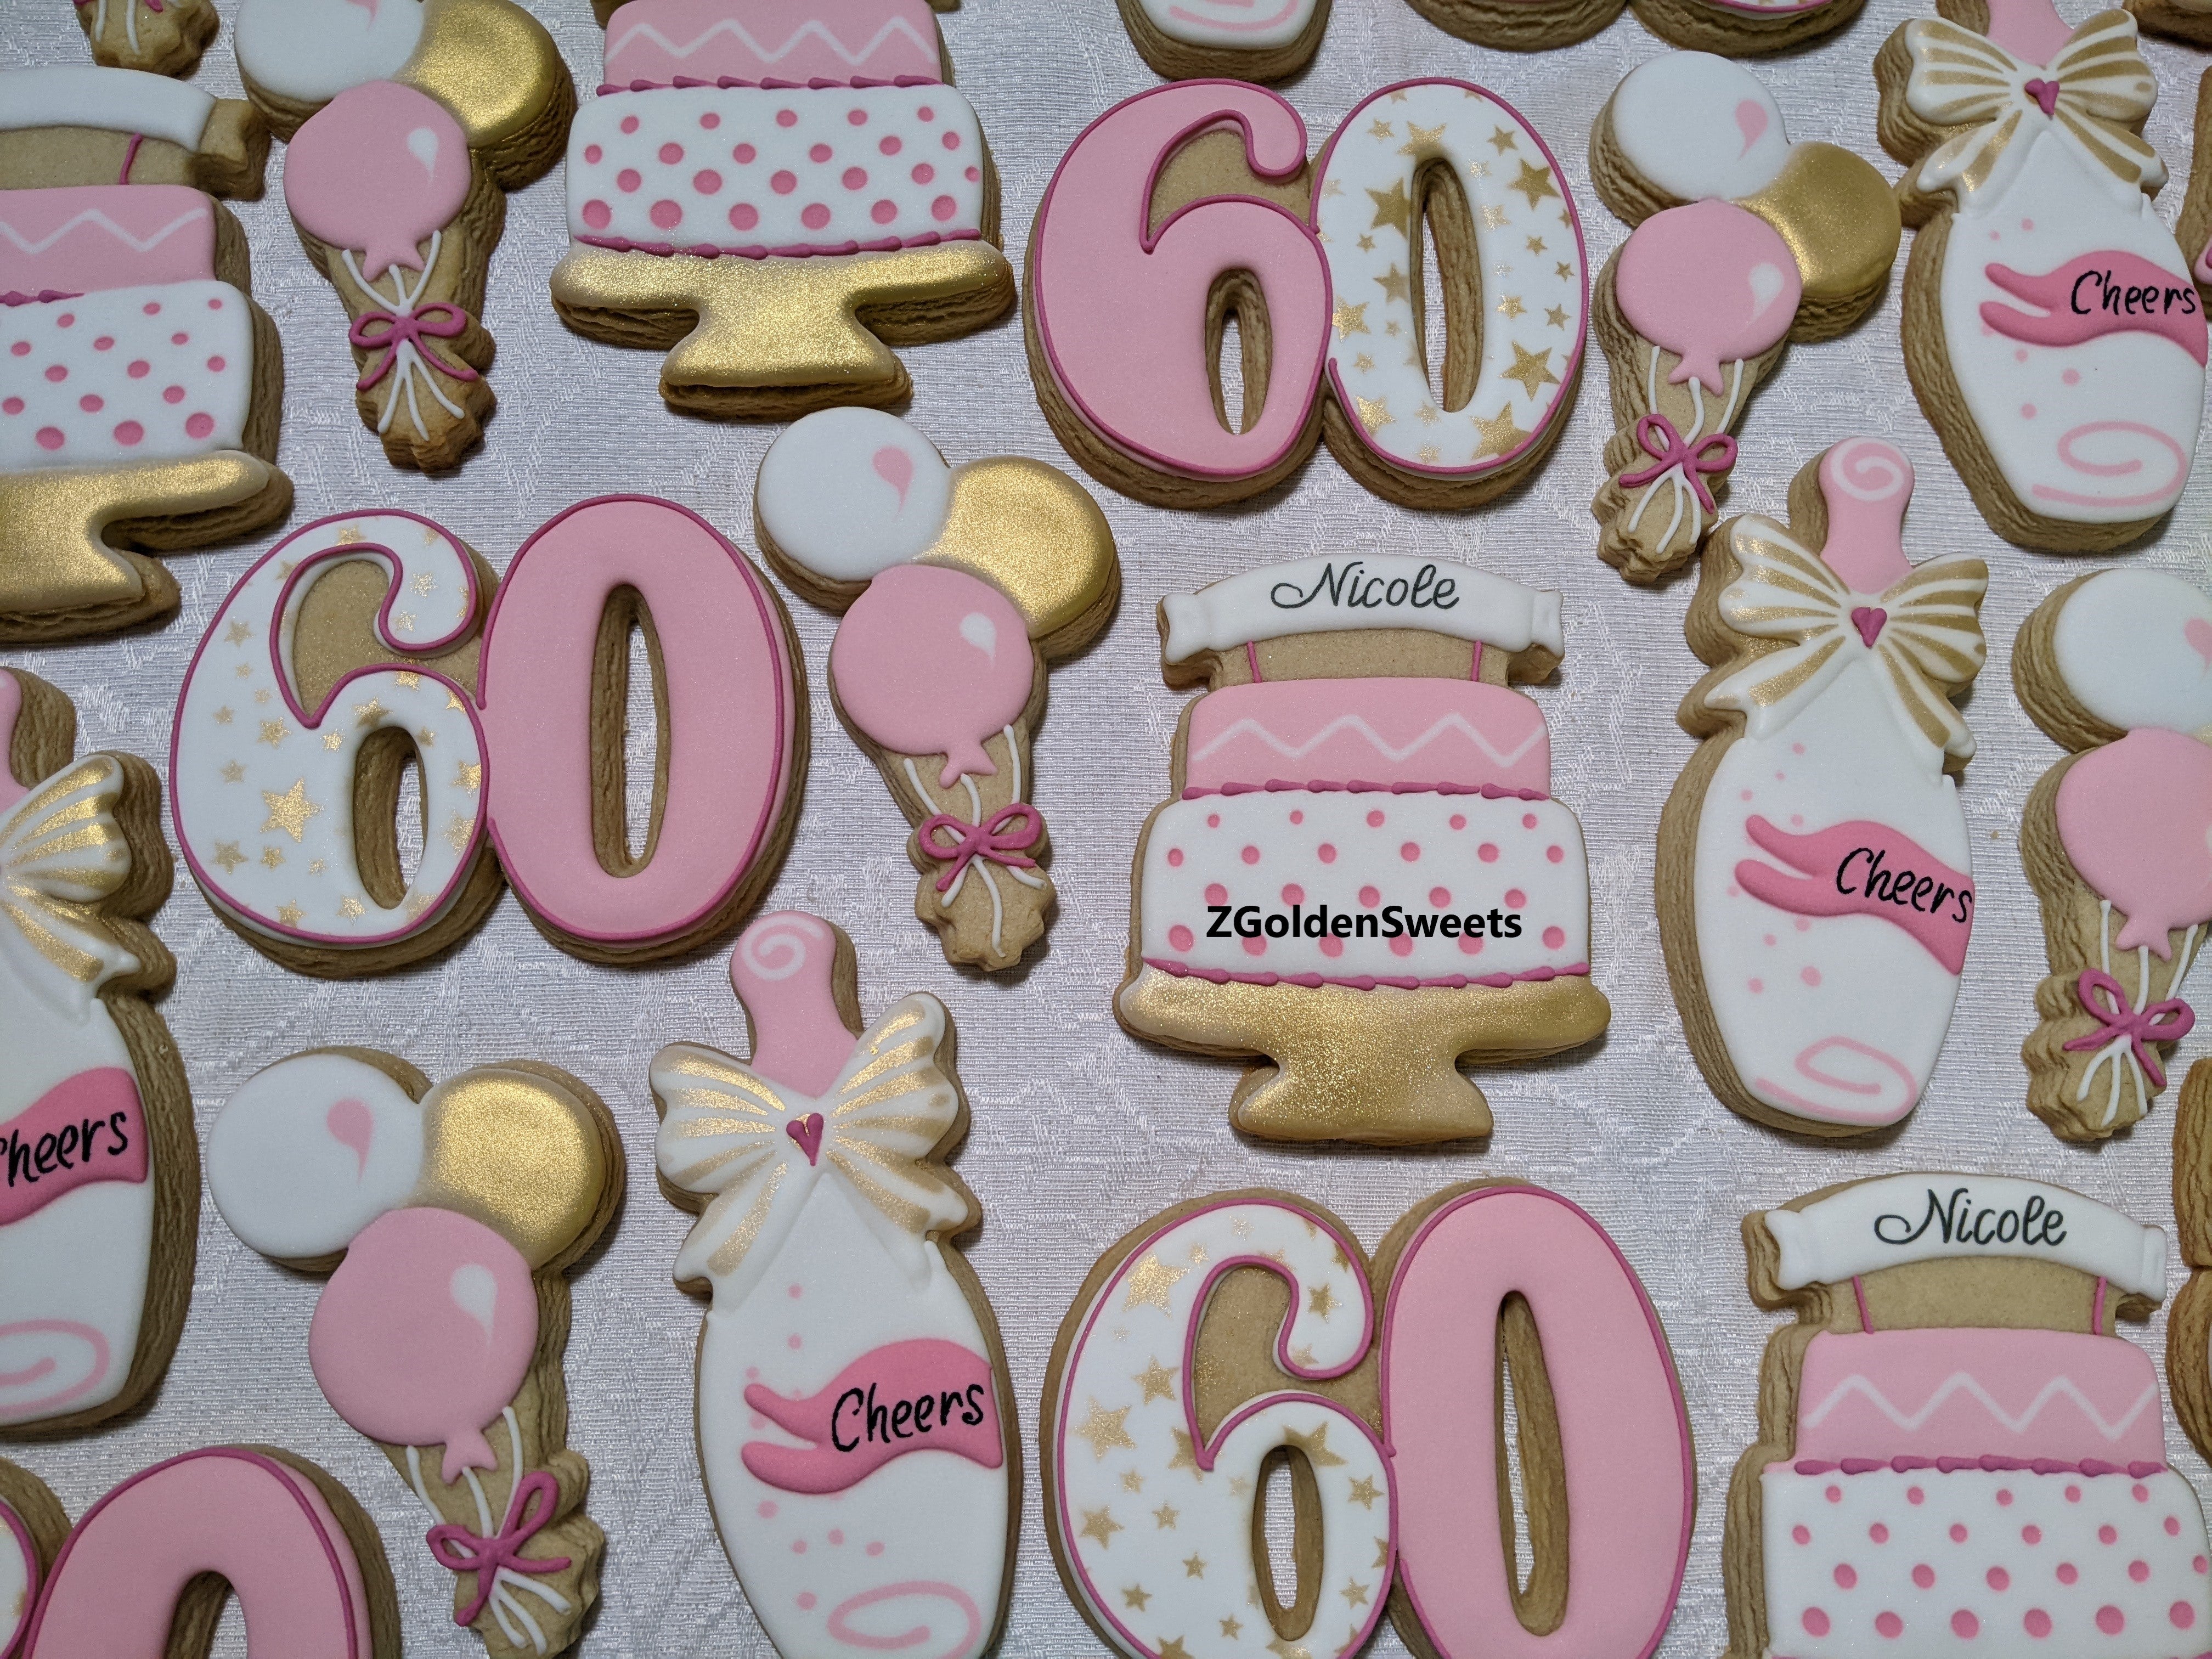 60th Birthday Party 24 Personalized Decorated Cookies